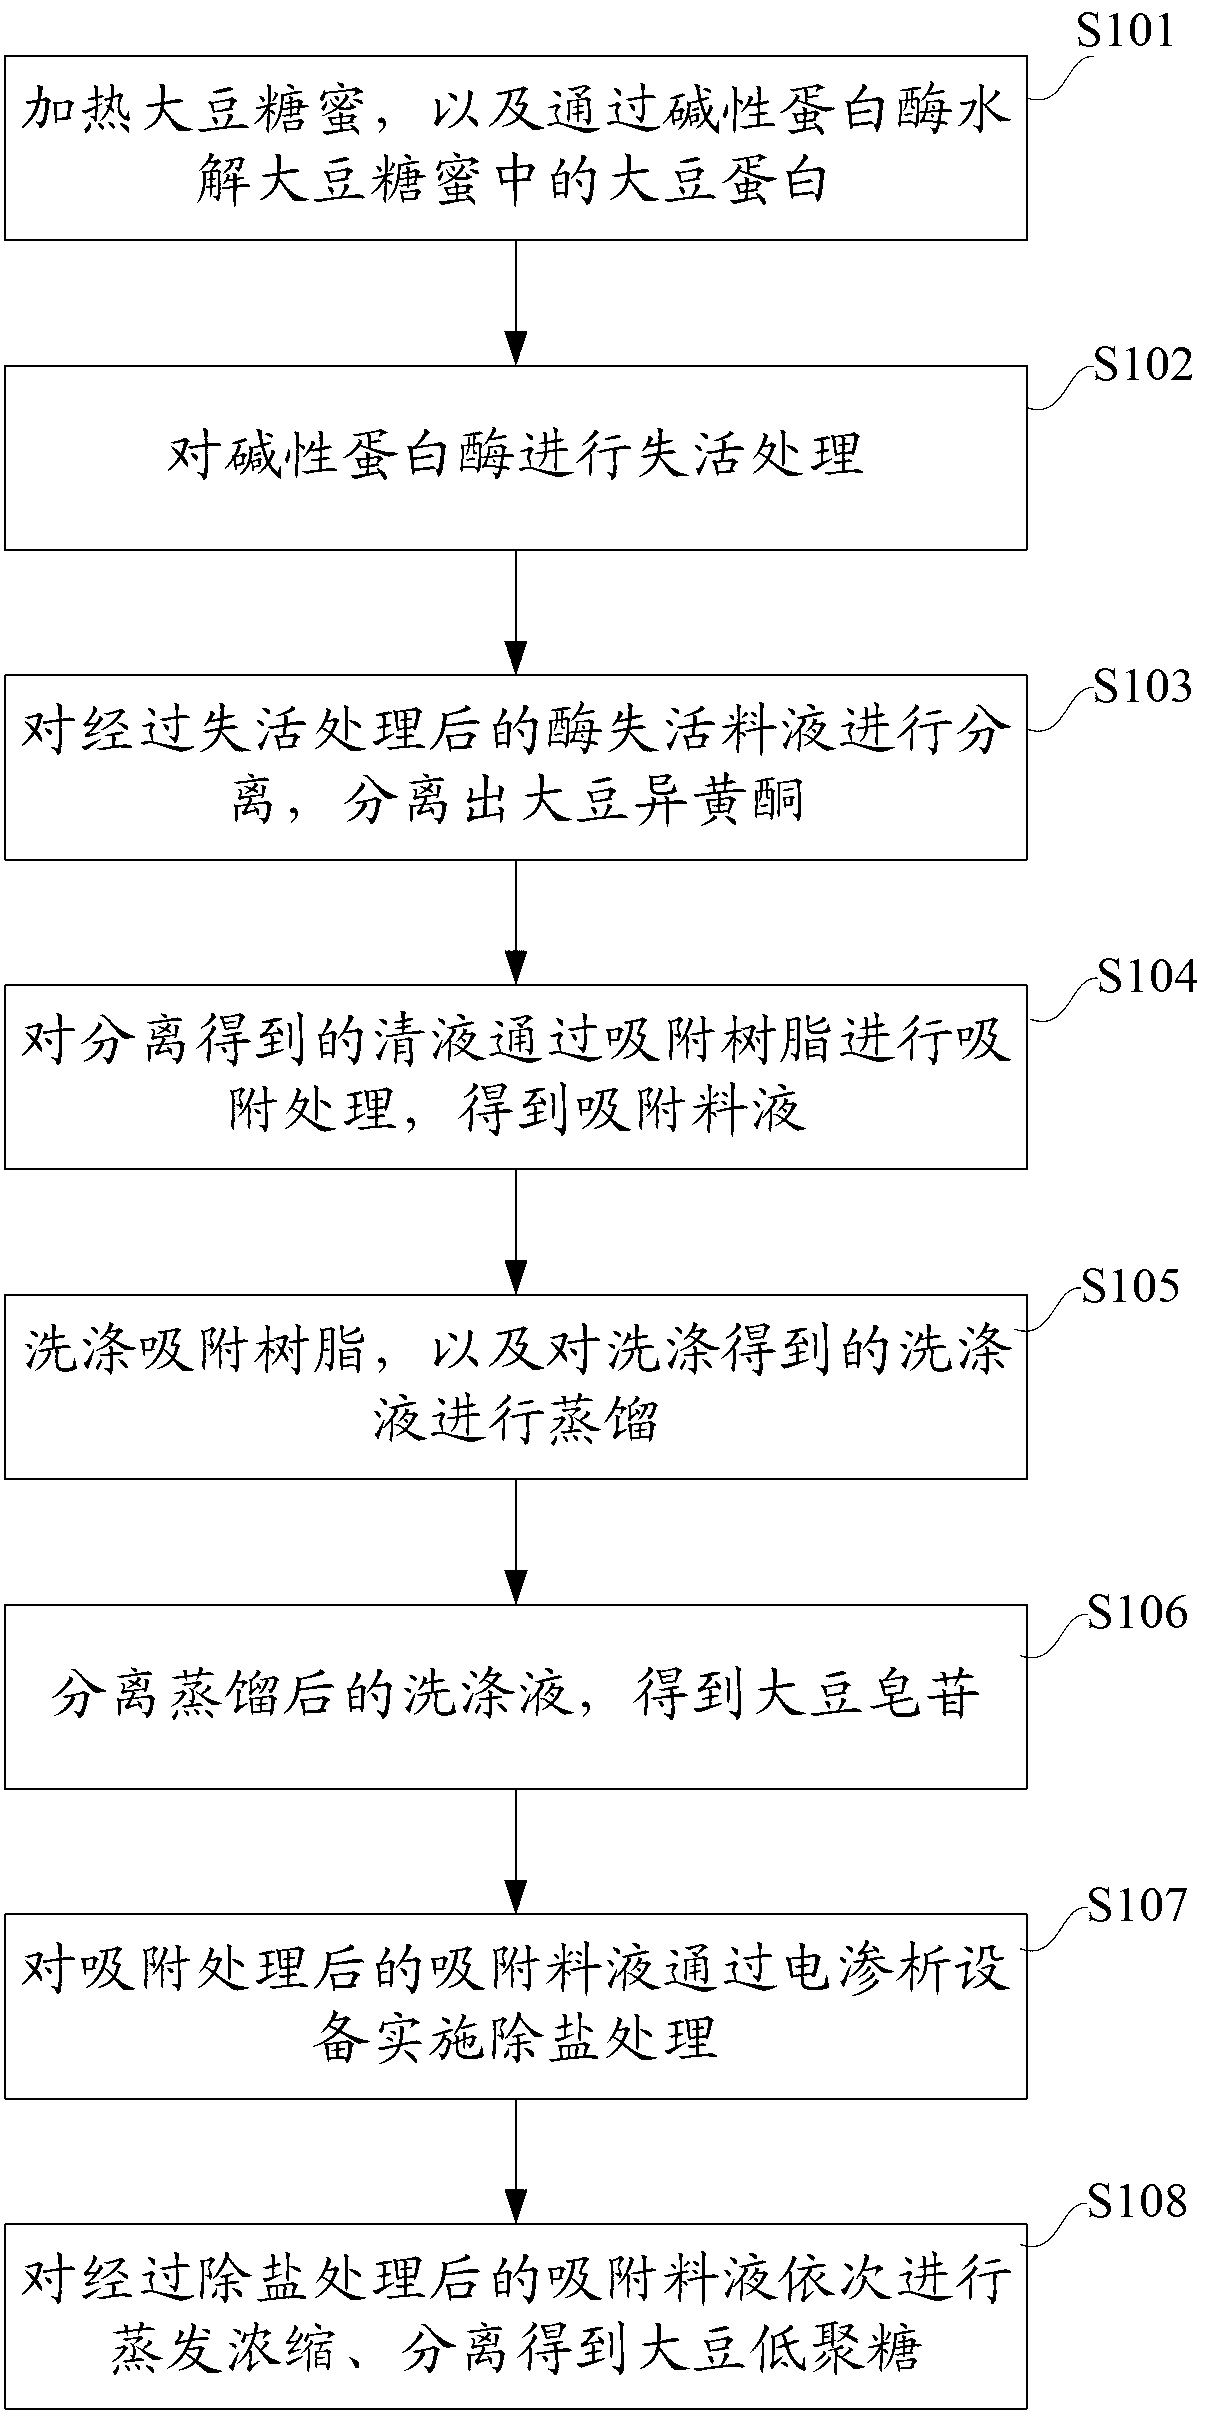 Method and equipment for extracting isoflavone, saponin and oligosaccharide from soy molasses